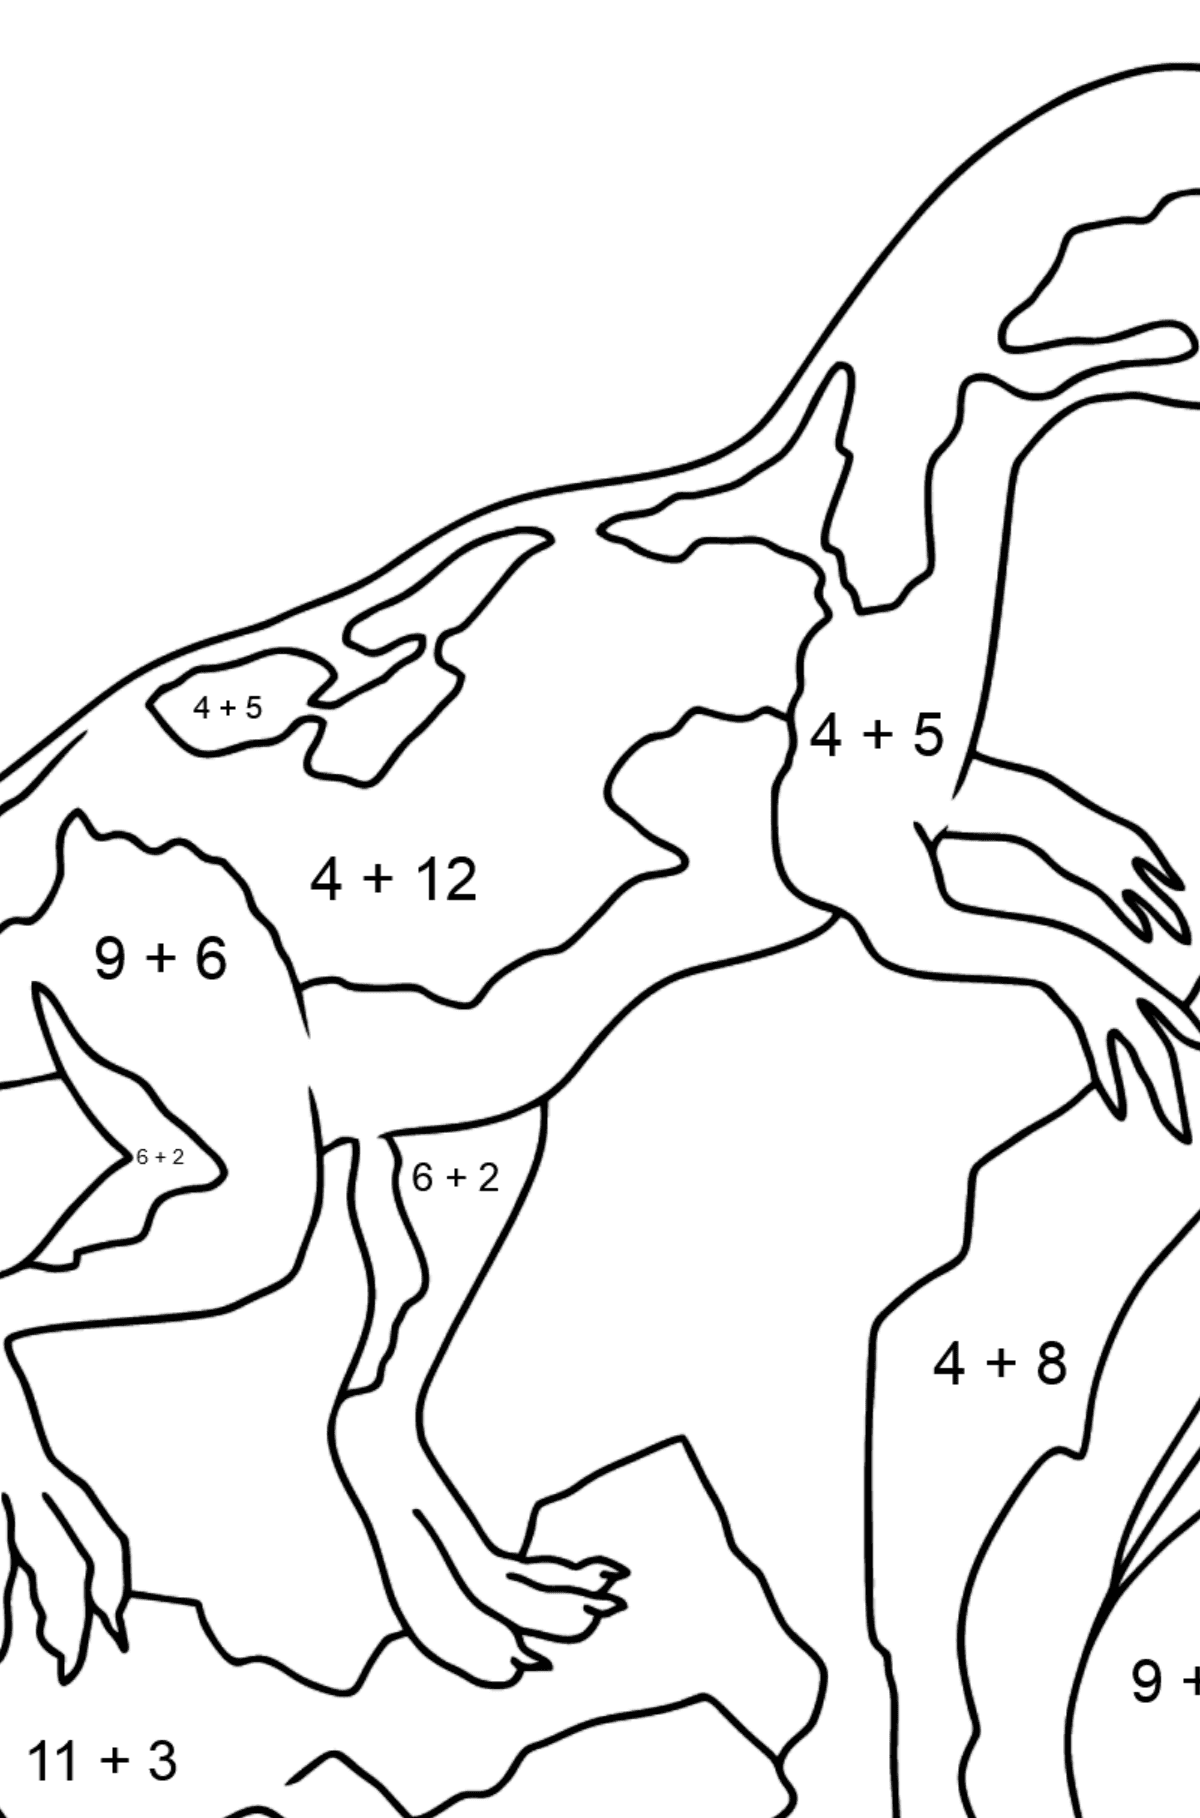 Coloring Page - Allosaurus - Jurassic Dinosaur - Math Coloring - Addition for Kids